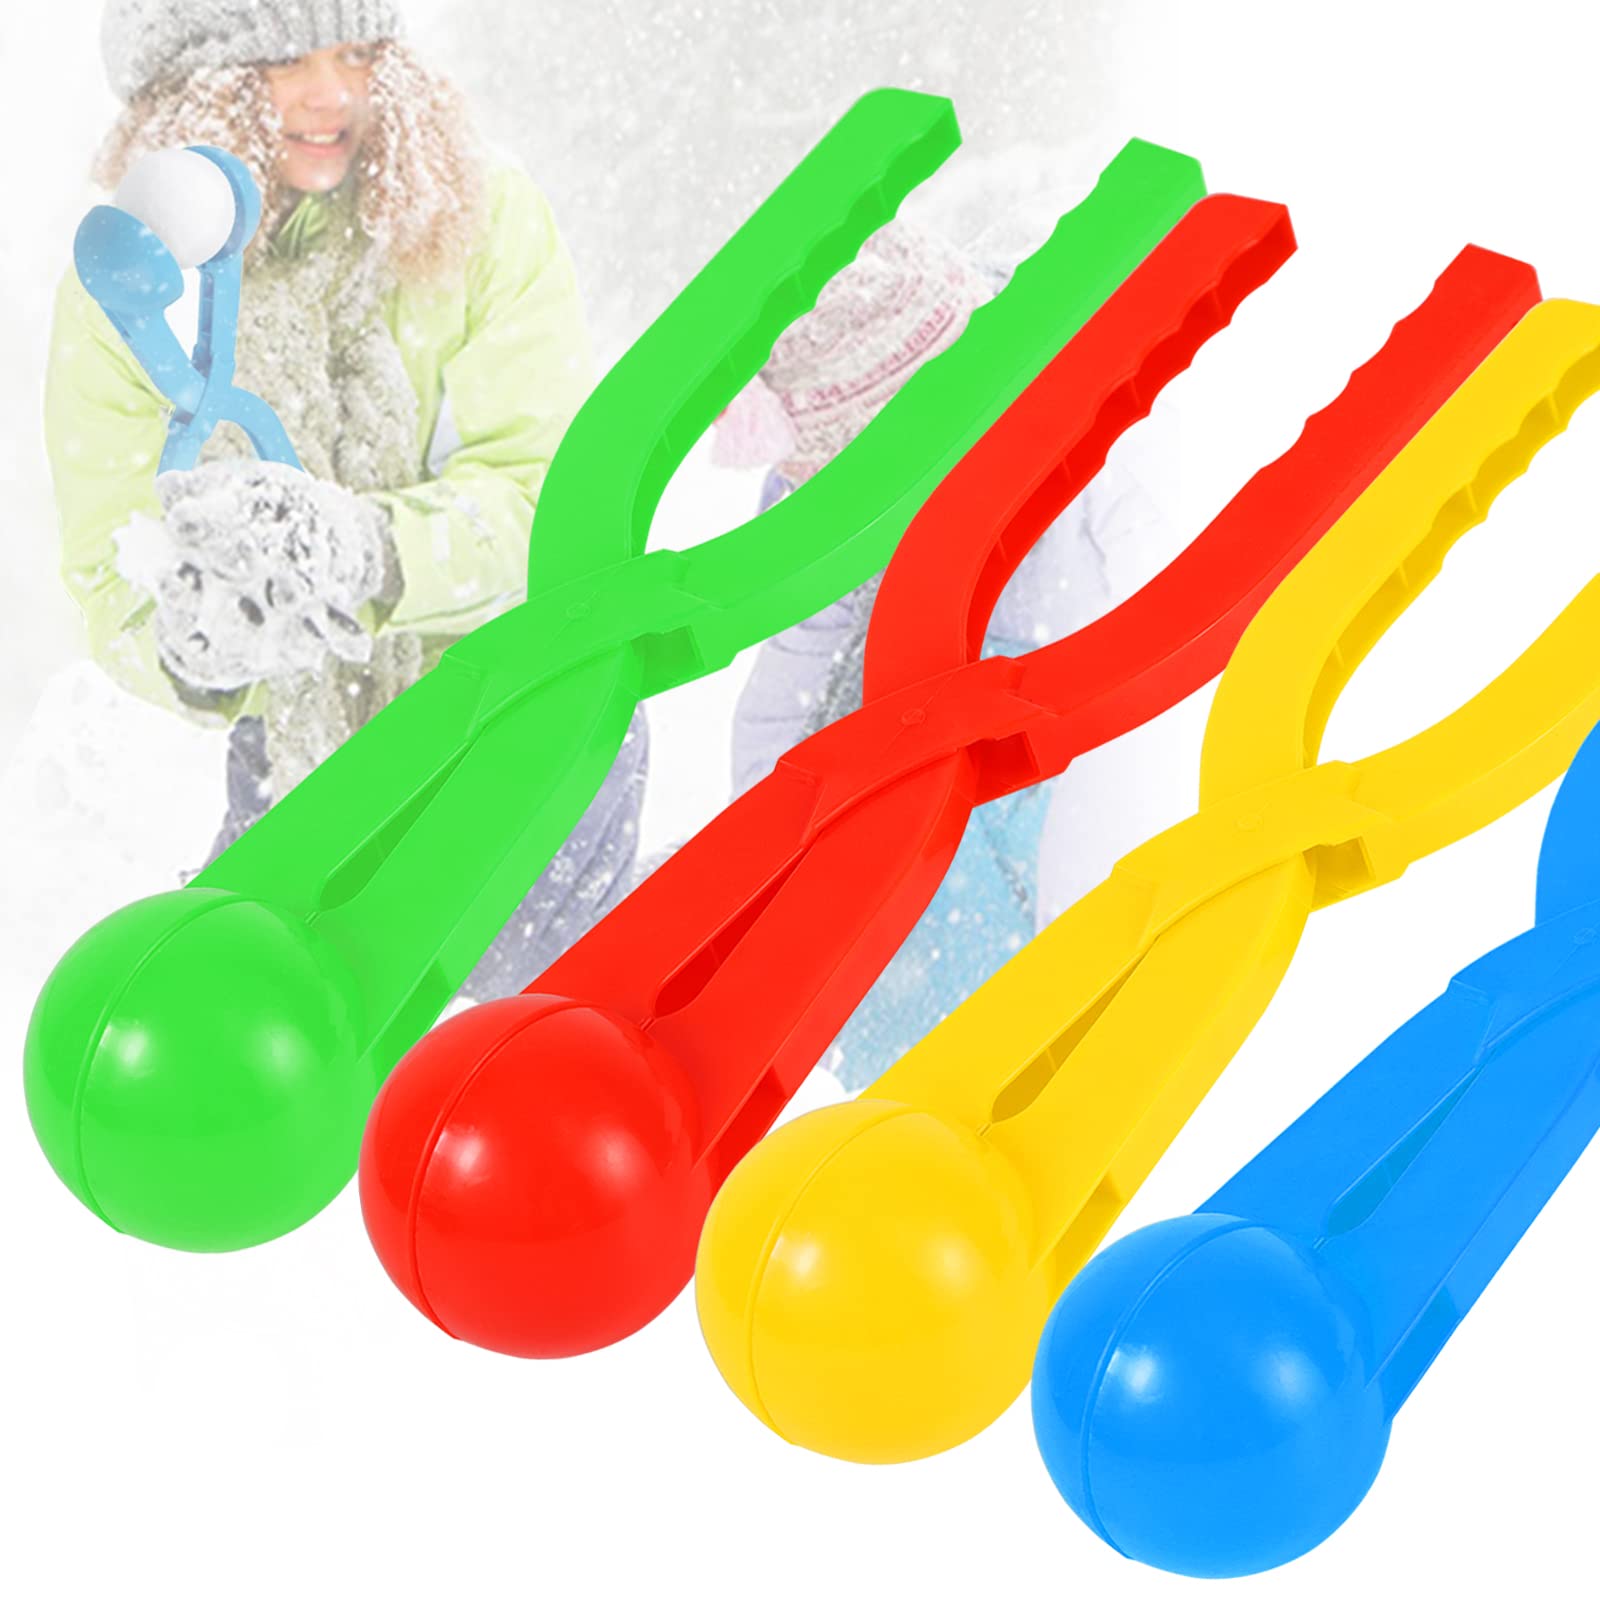 Snowball Maker Toys, Snow Toys for Kids Outdoor, Fun Winter Snow Ball Fight Games Snow Ball Maker Tool with Handle for Snow Ball, Durable Snow Ball Maker Shape (Safe & Thicker Material)